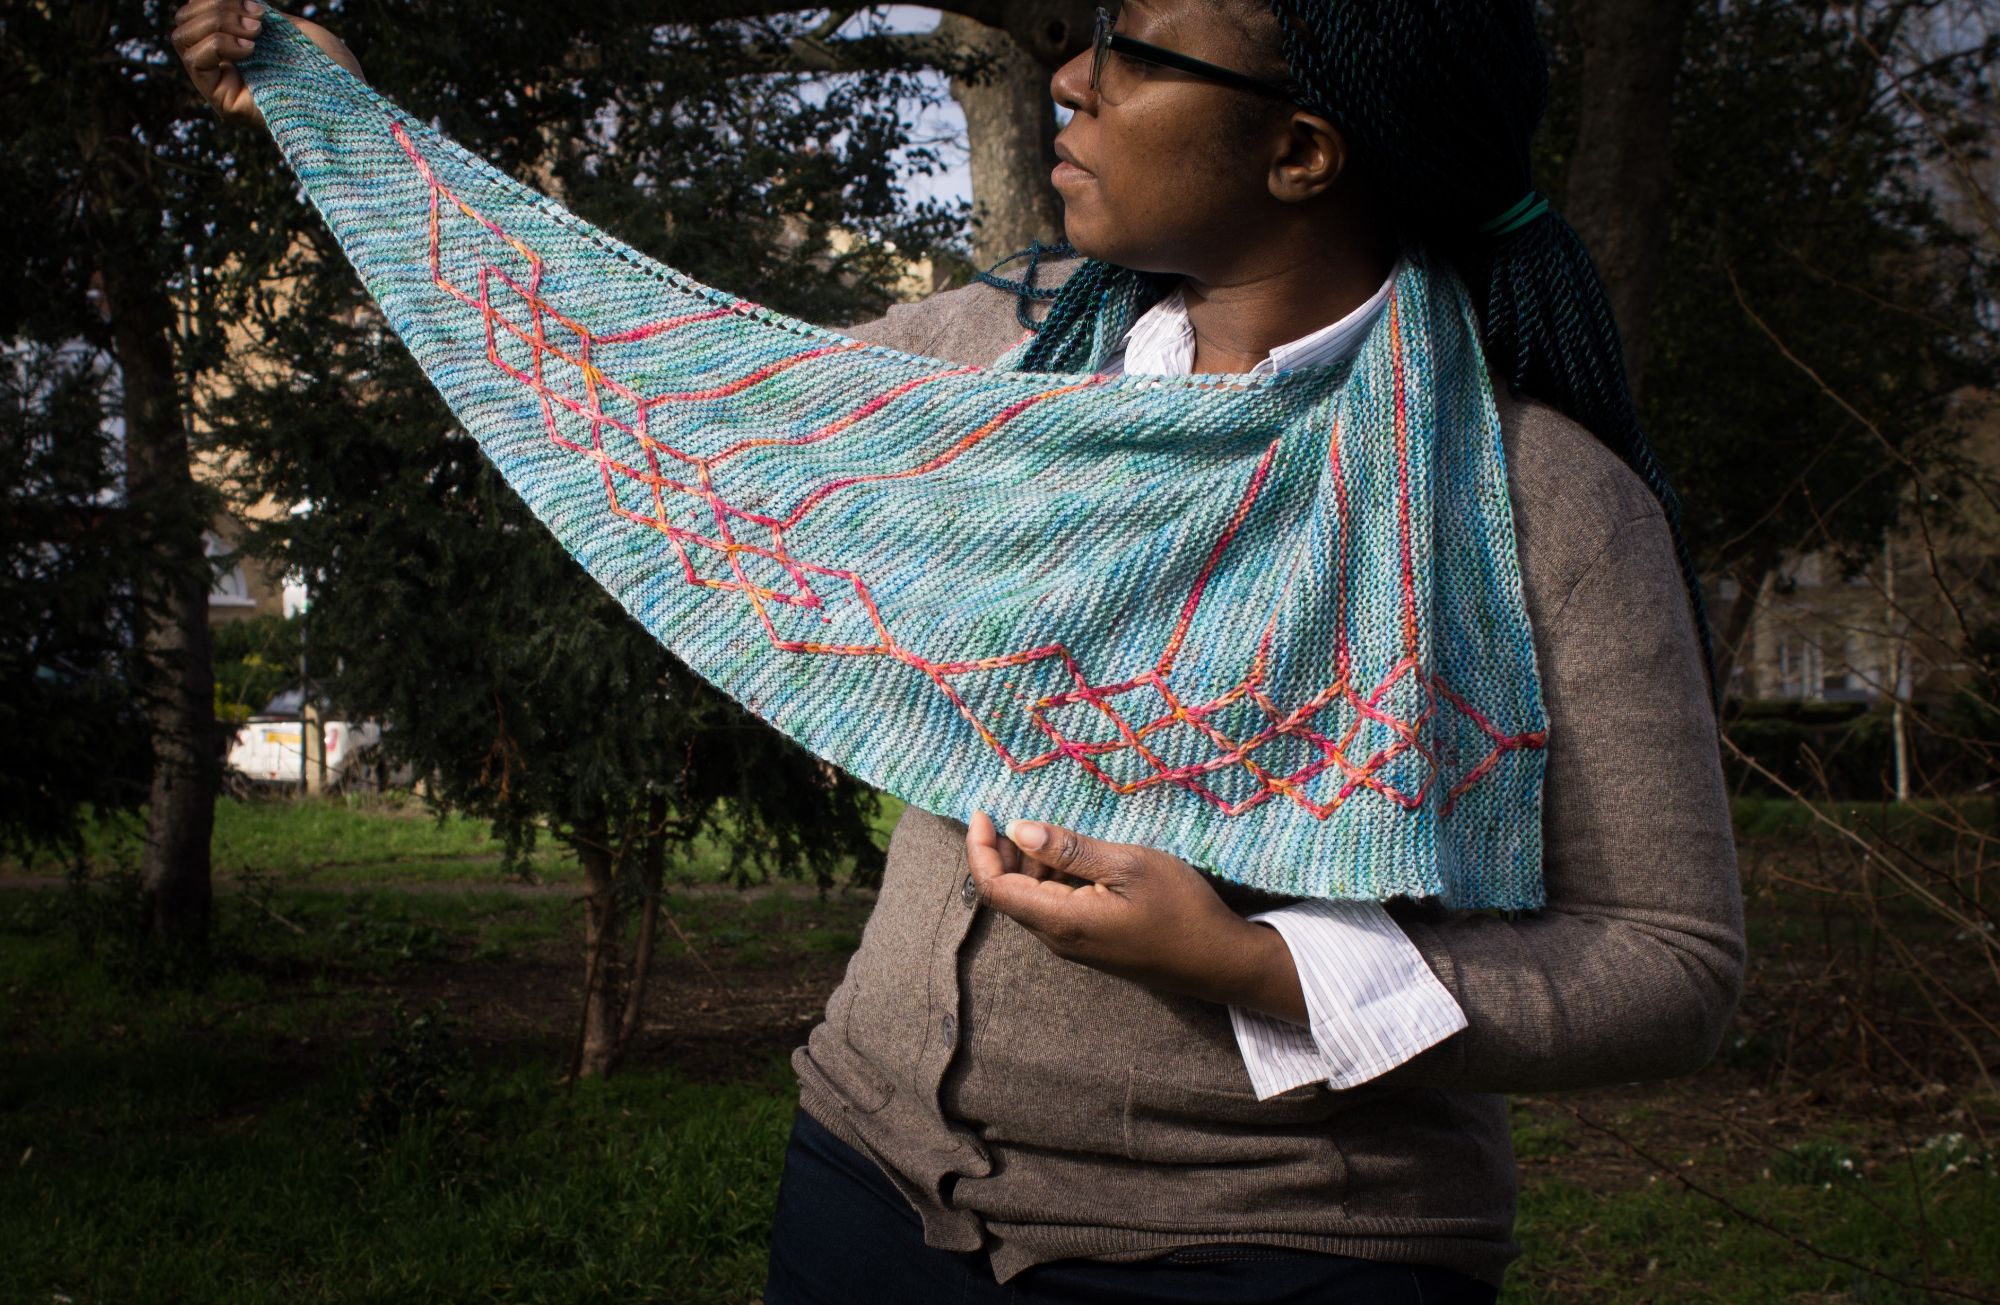 black person holding up blue shawl with a cable pattern in orange running down one edge